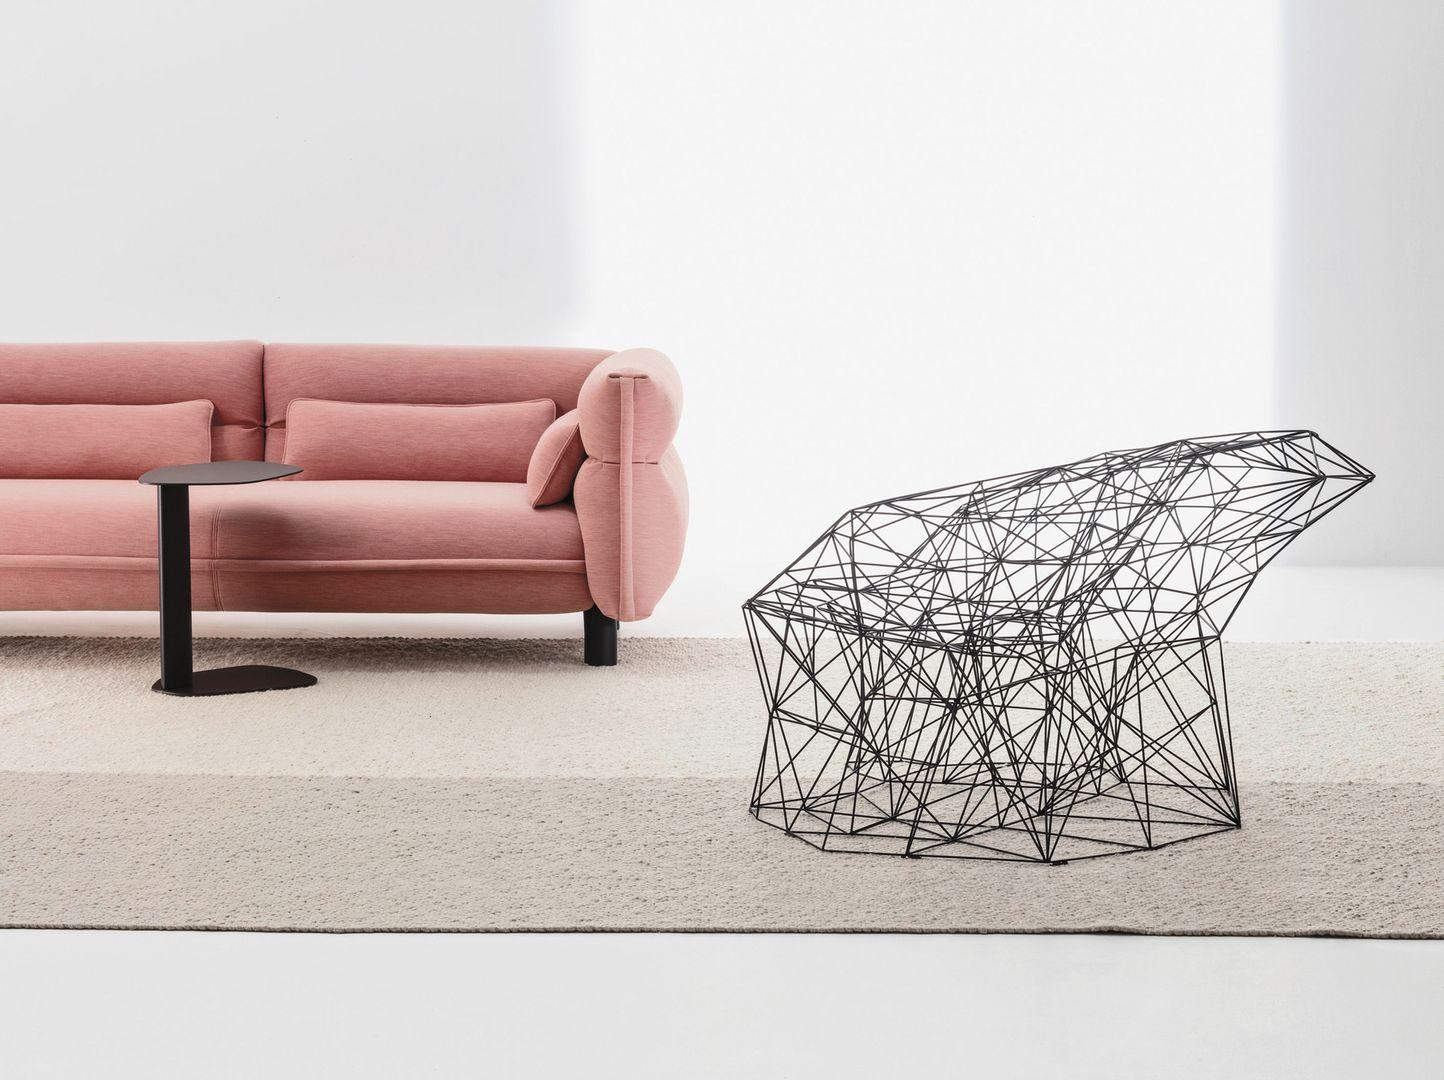 The futuristic Filinea armchair fuses natural and technological qualities. It takes its cue from euphorbia tirucalli trees and is made of round, extremely slender steel bars. The plants are very common in the South of Italy and their intricately